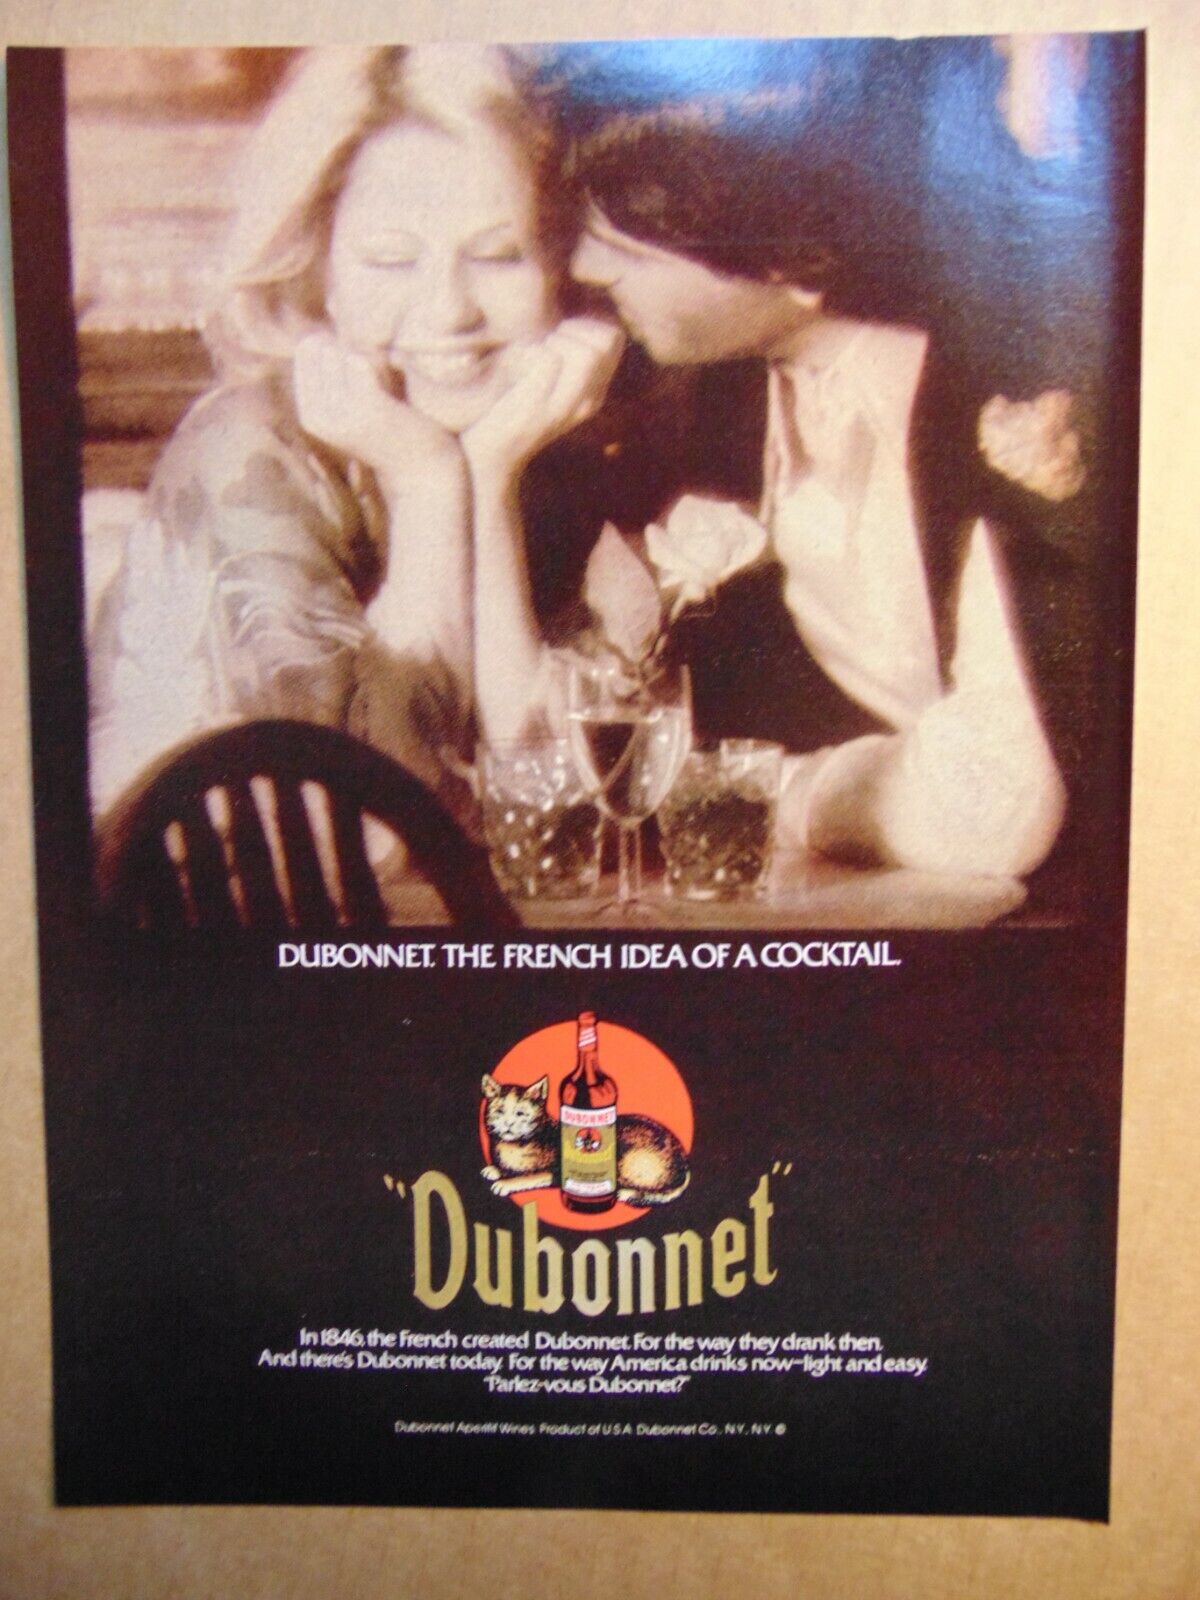 1979 Dubonnet The French Idea Of A Cocktail Happy Couple Vintage Art Print Ad